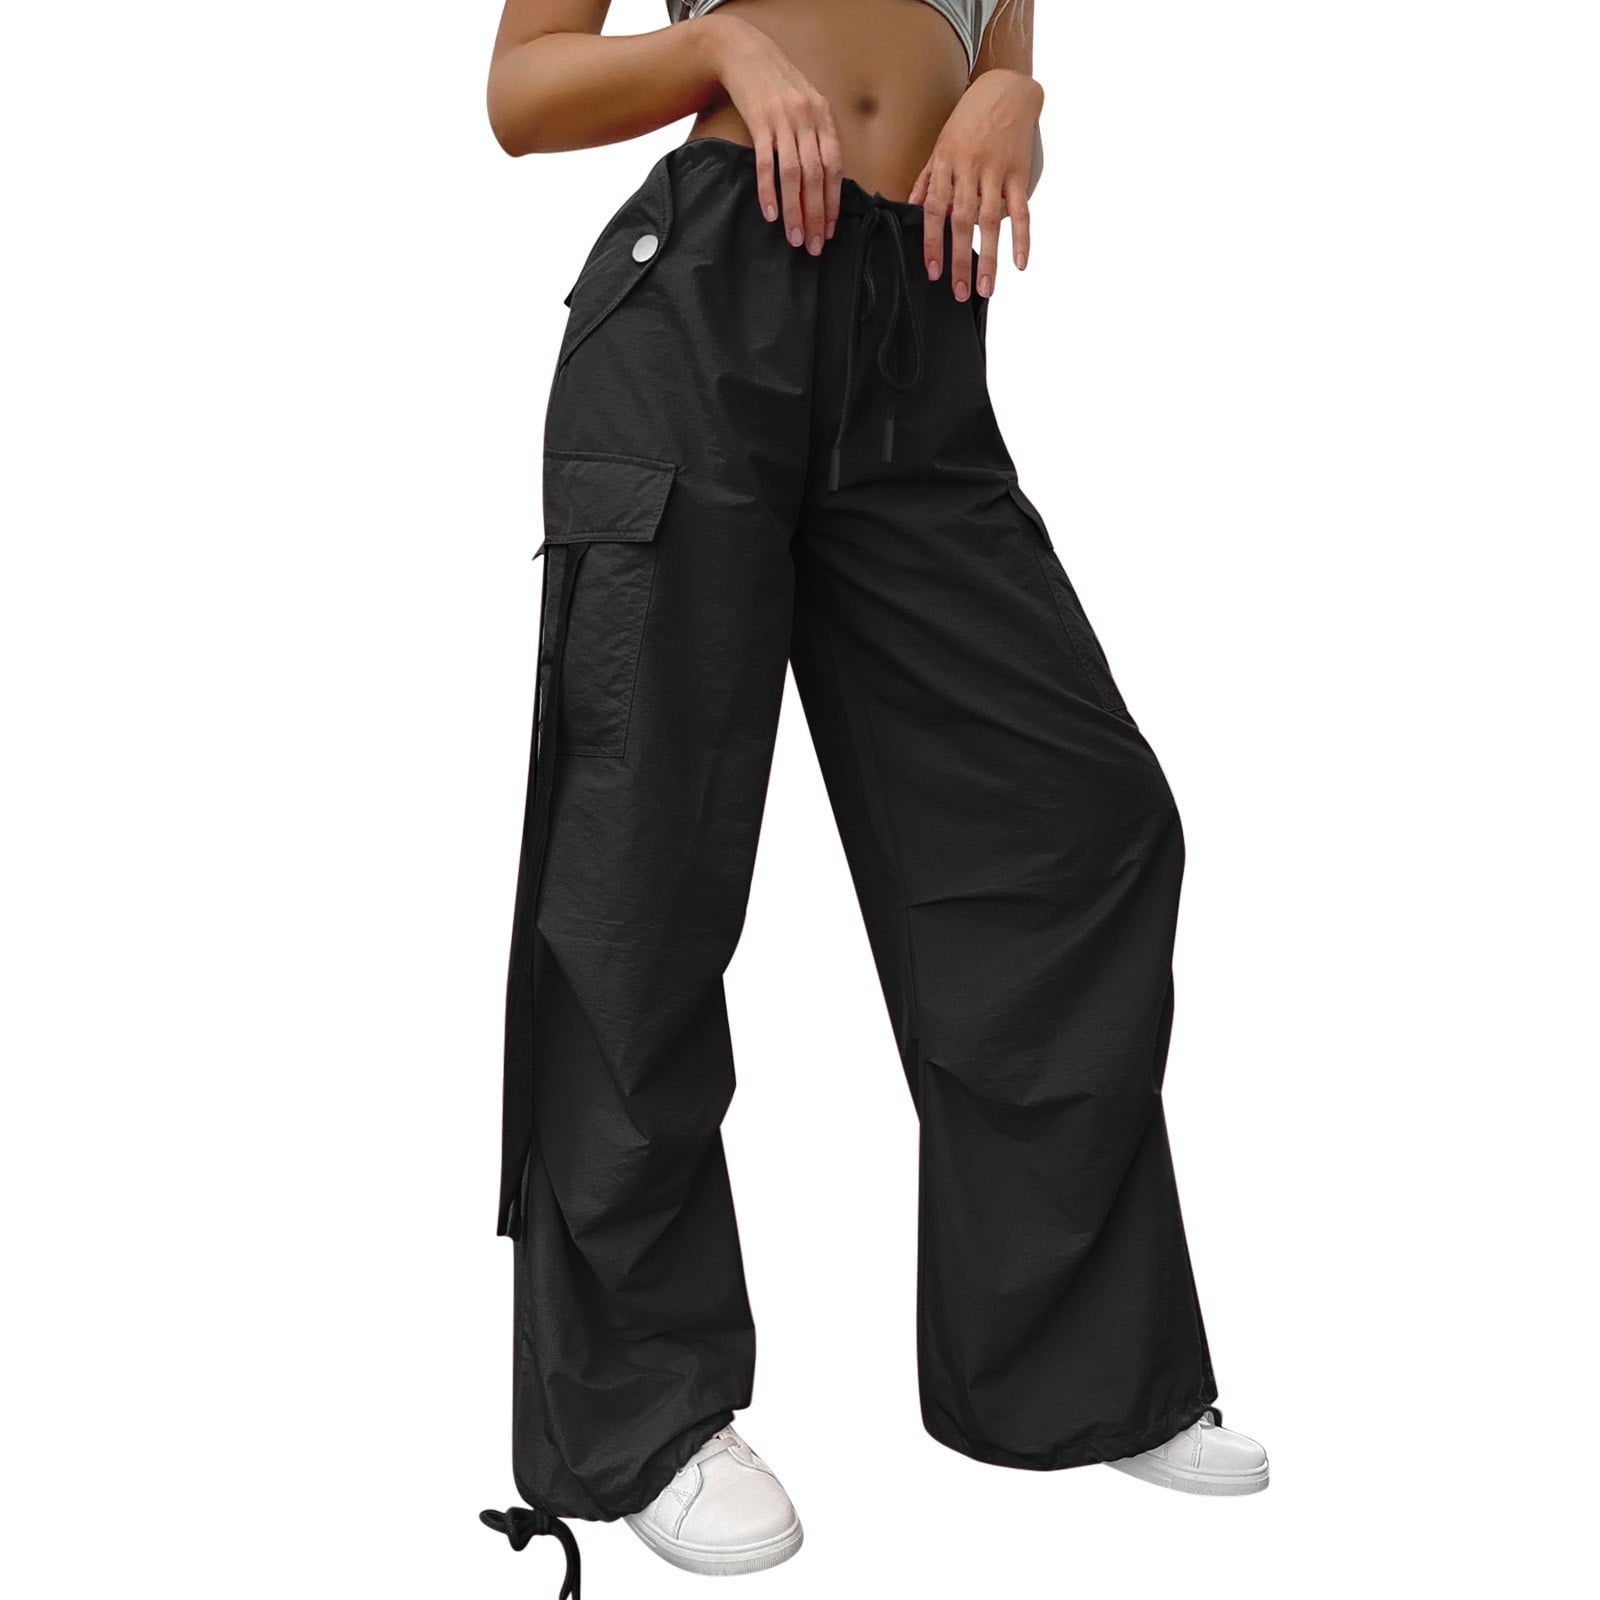 High Street Modern Cargo Pants For Men And Women Loose Straight Fit With  Bandage Pocket, Flared Design, And Casual Style Neutral Color G1007 From  Catherine002, $17.17 | DHgate.Com